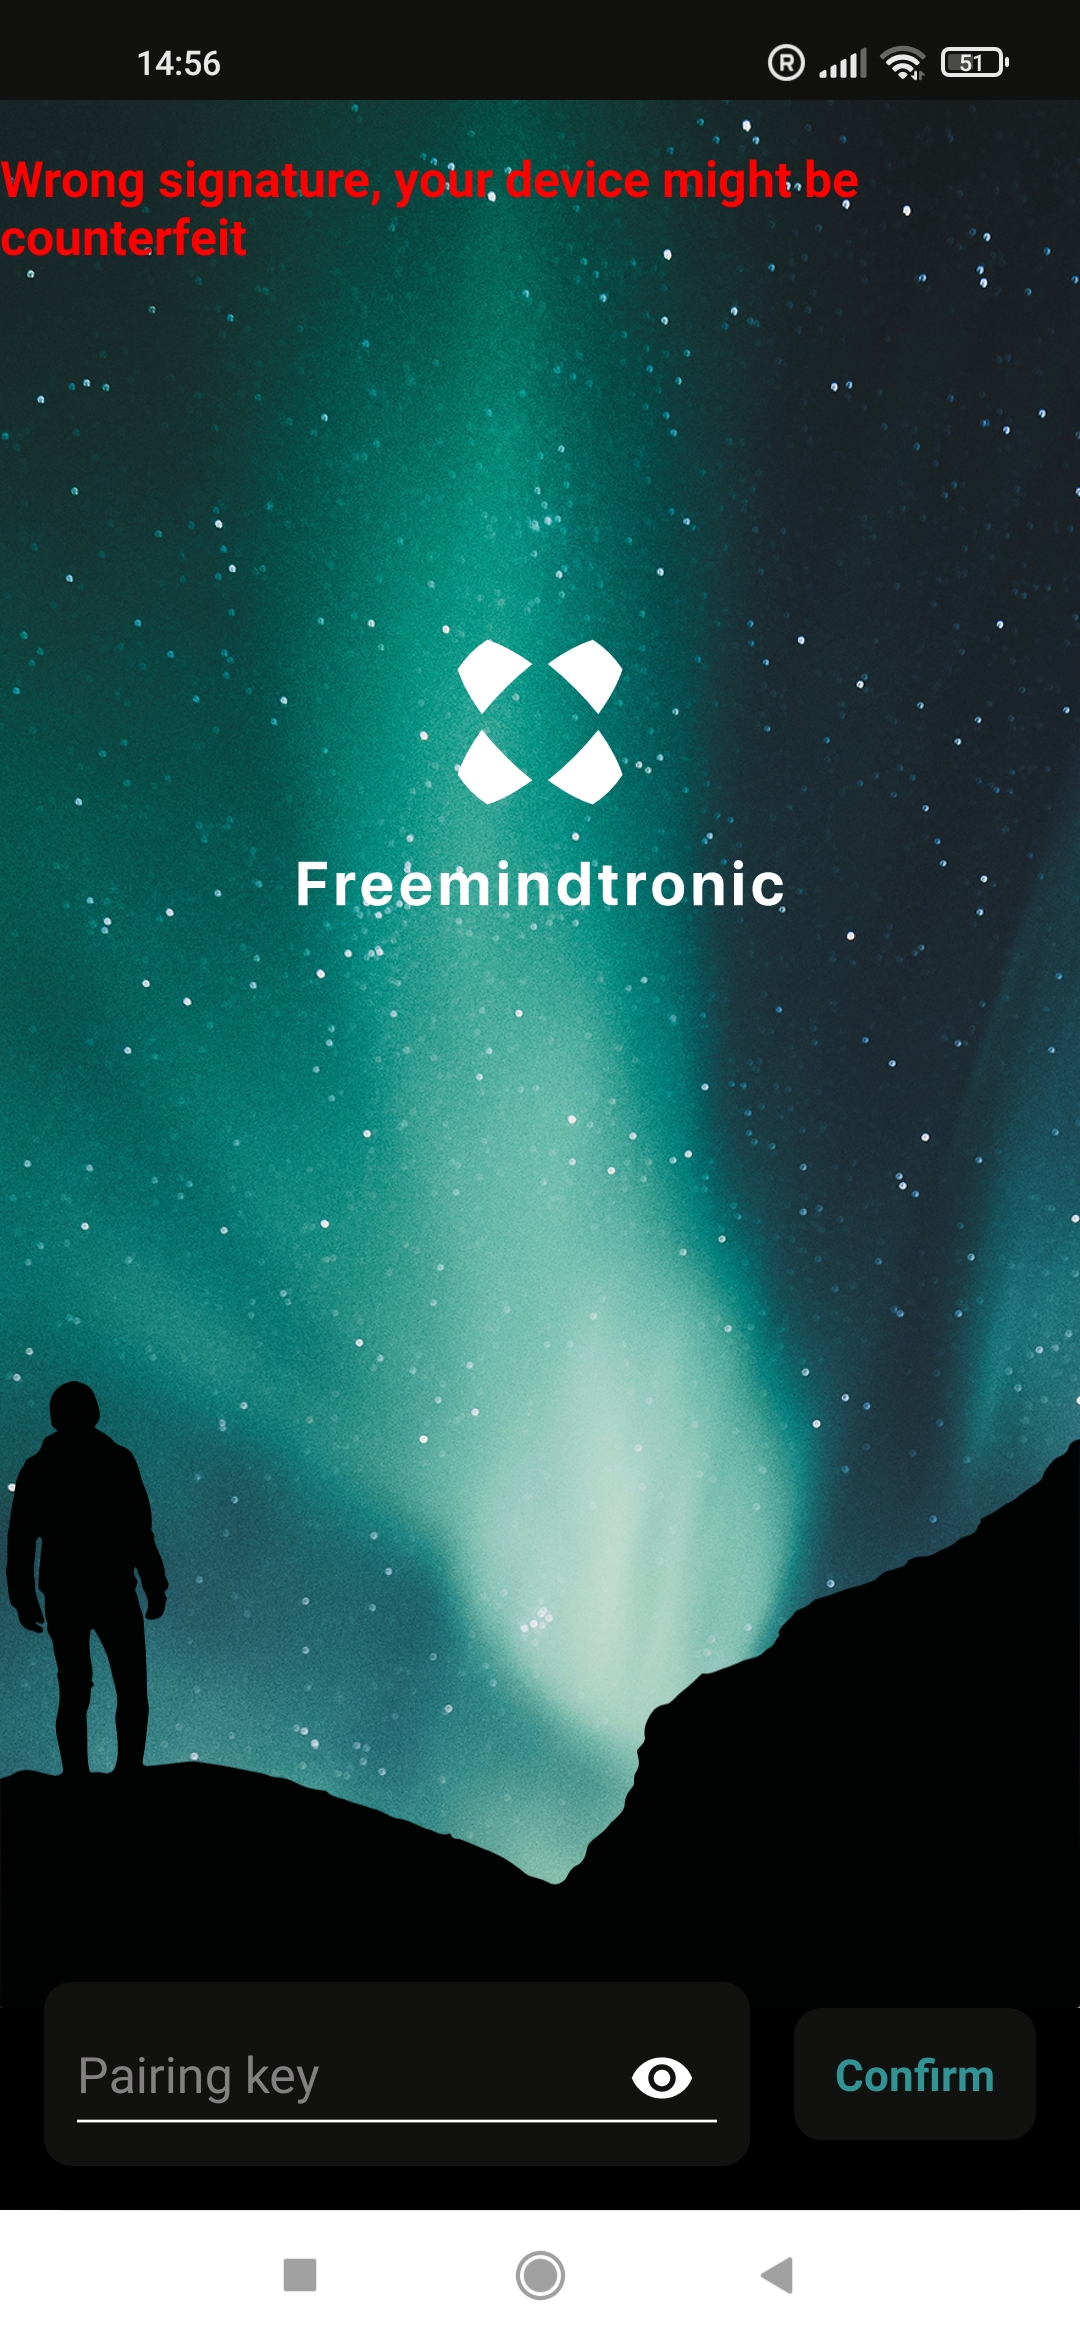 Automatic device authenticity check Freemindtronic application counterfeiting protection